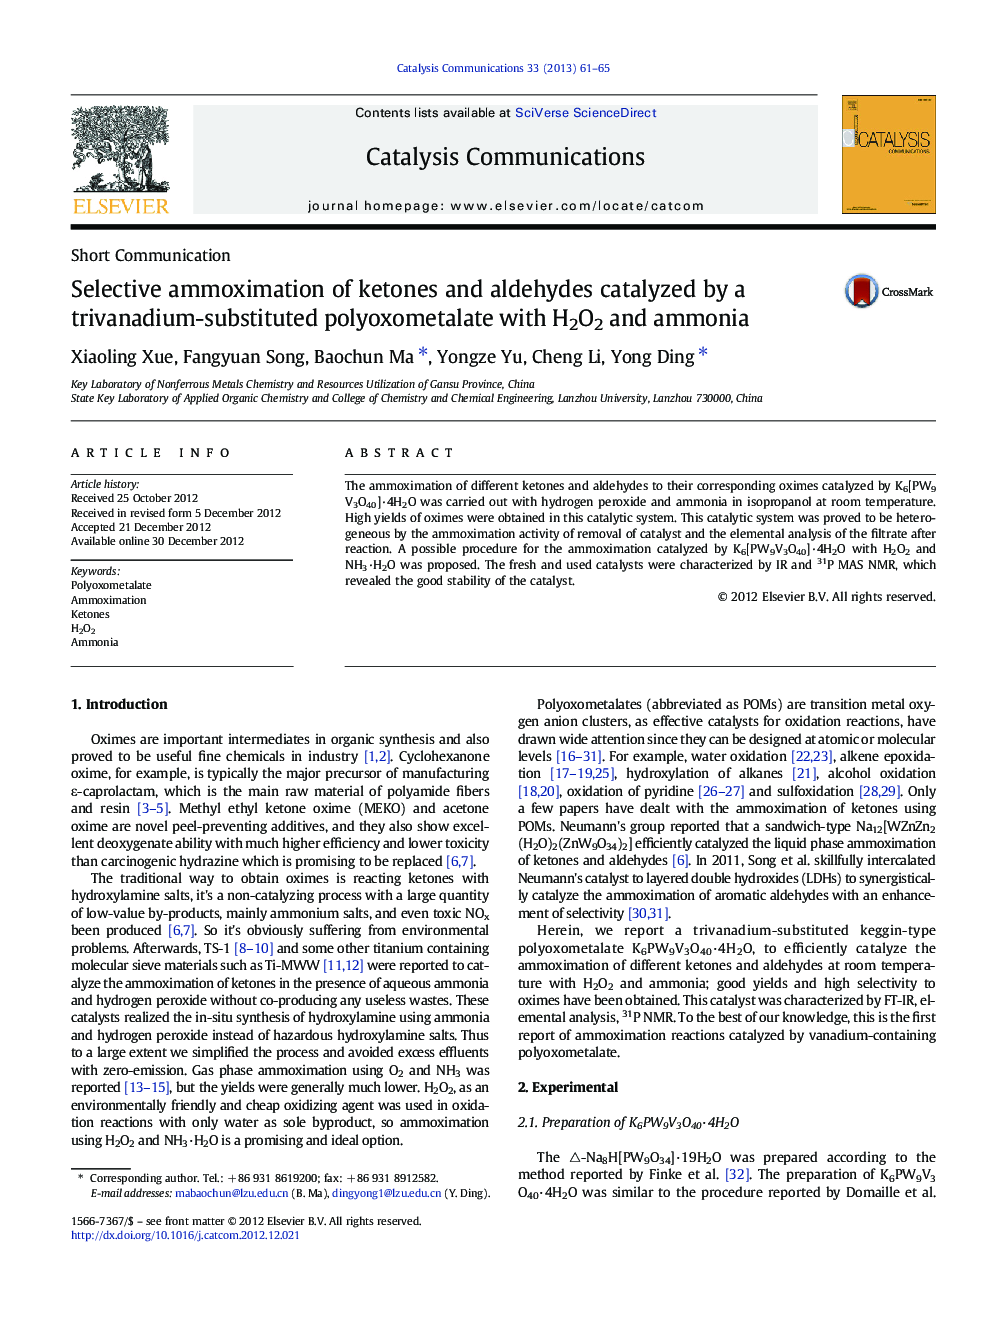 Selective ammoximation of ketones and aldehydes catalyzed by a trivanadium-substituted polyoxometalate with H2O2 and ammonia